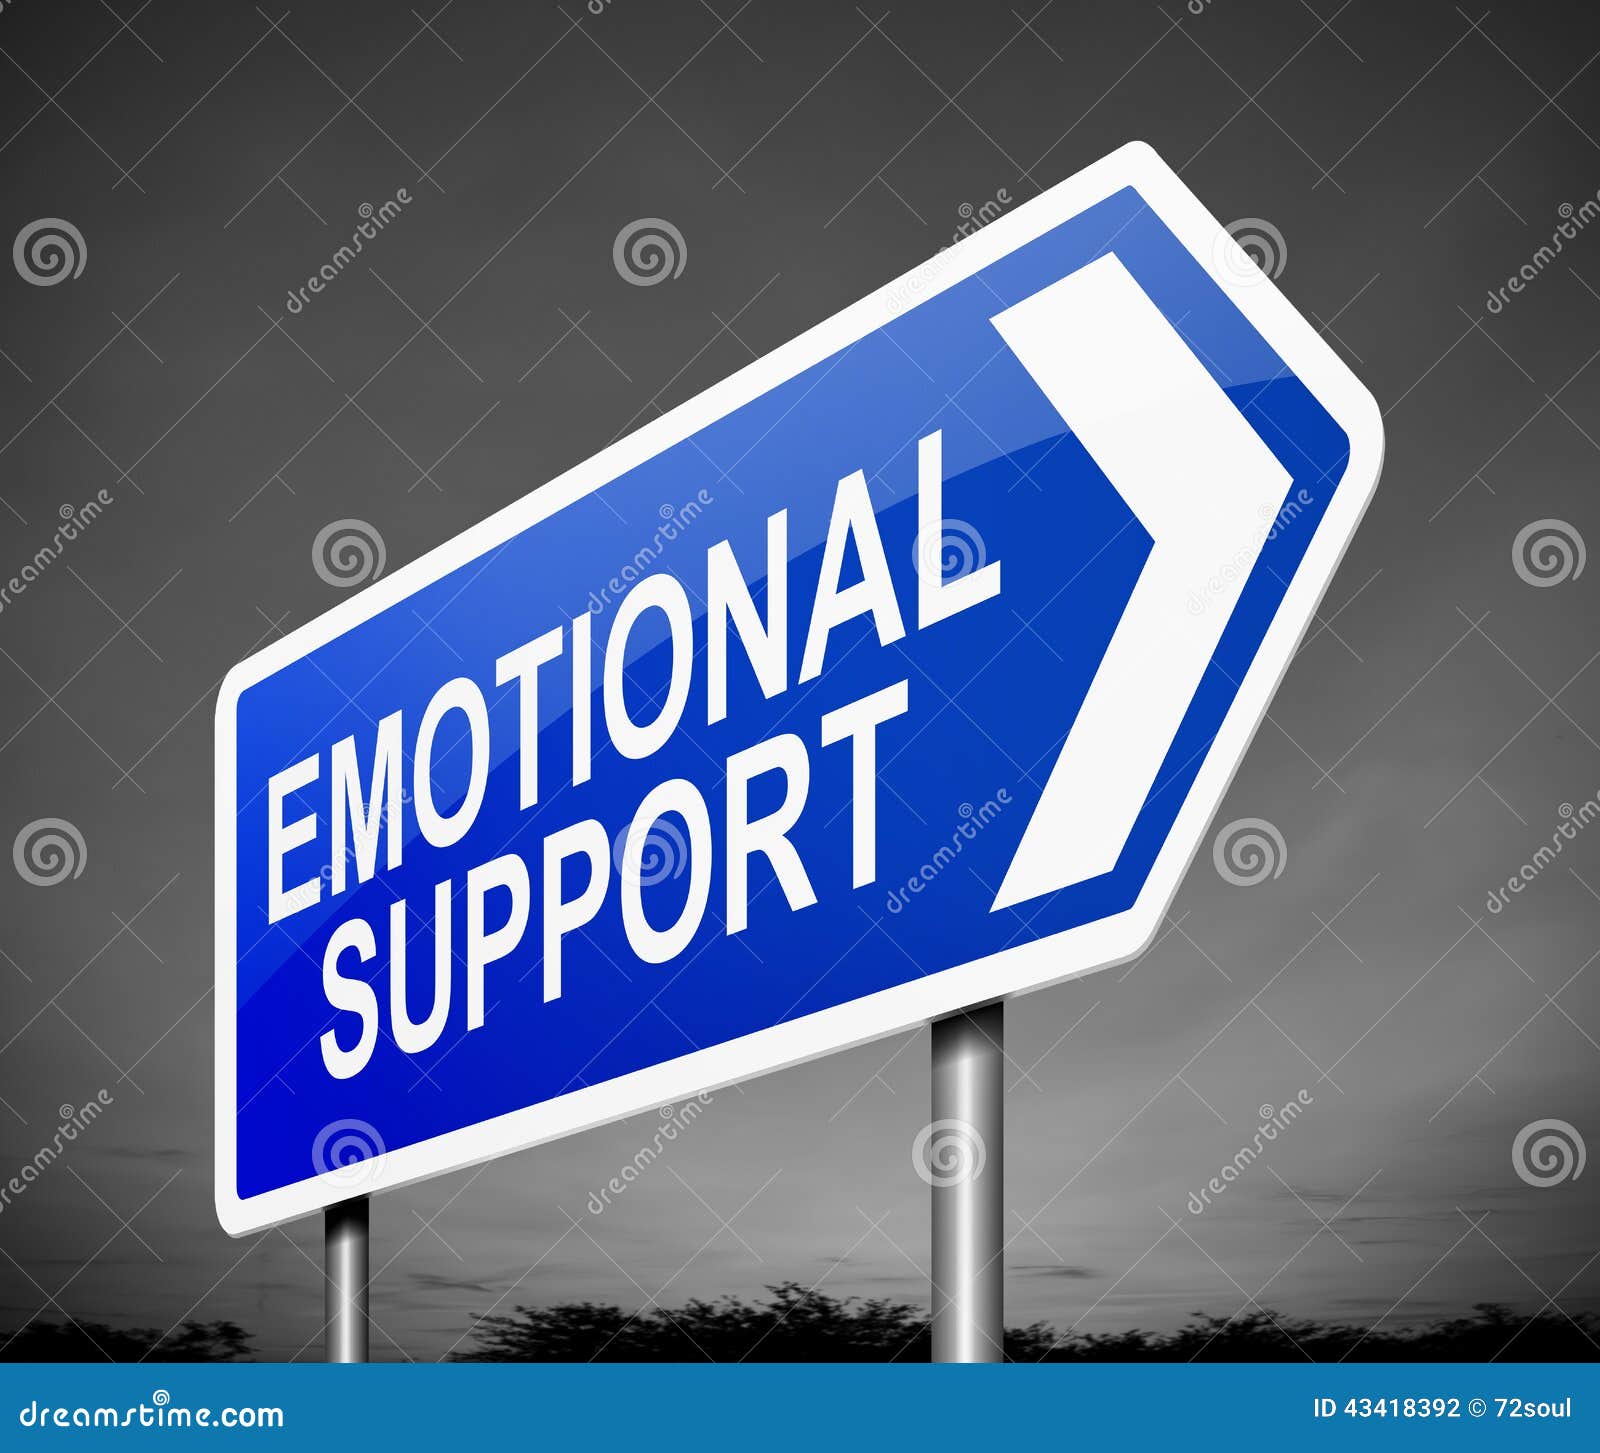 emotional support concept.